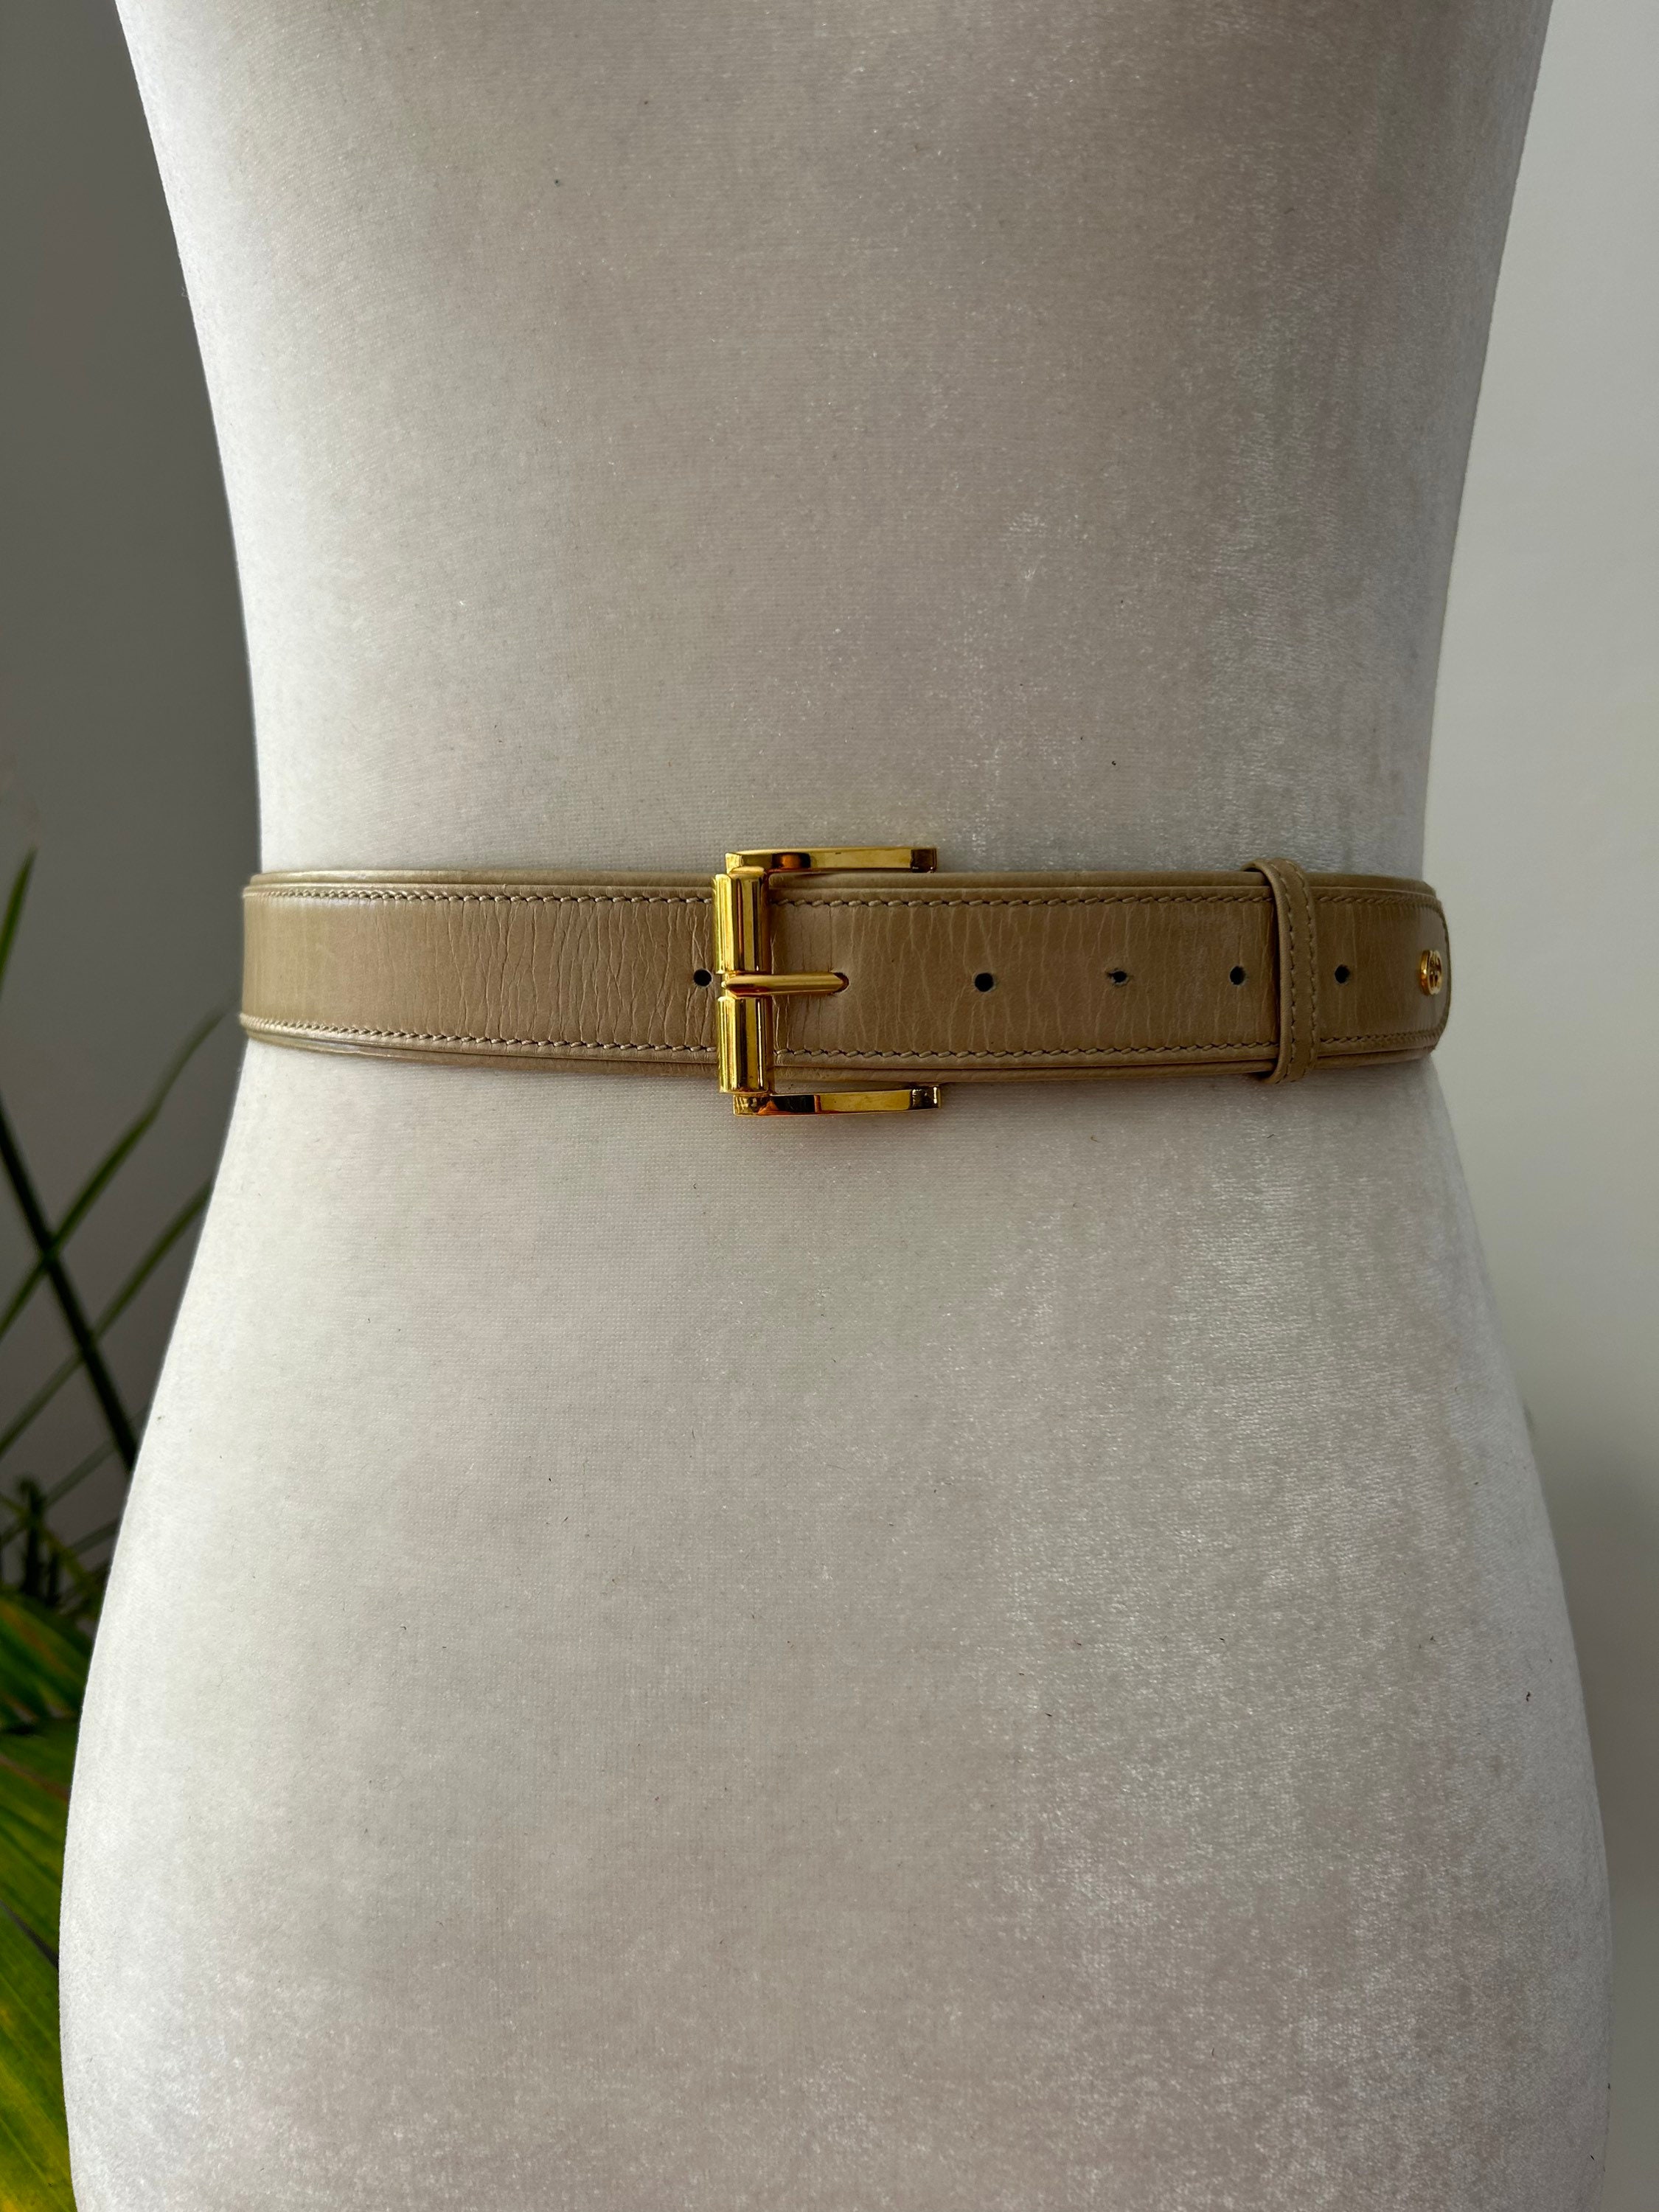 Vintage 60s Gucci Belt Leather and Canvas 28” - 30.5” Waist